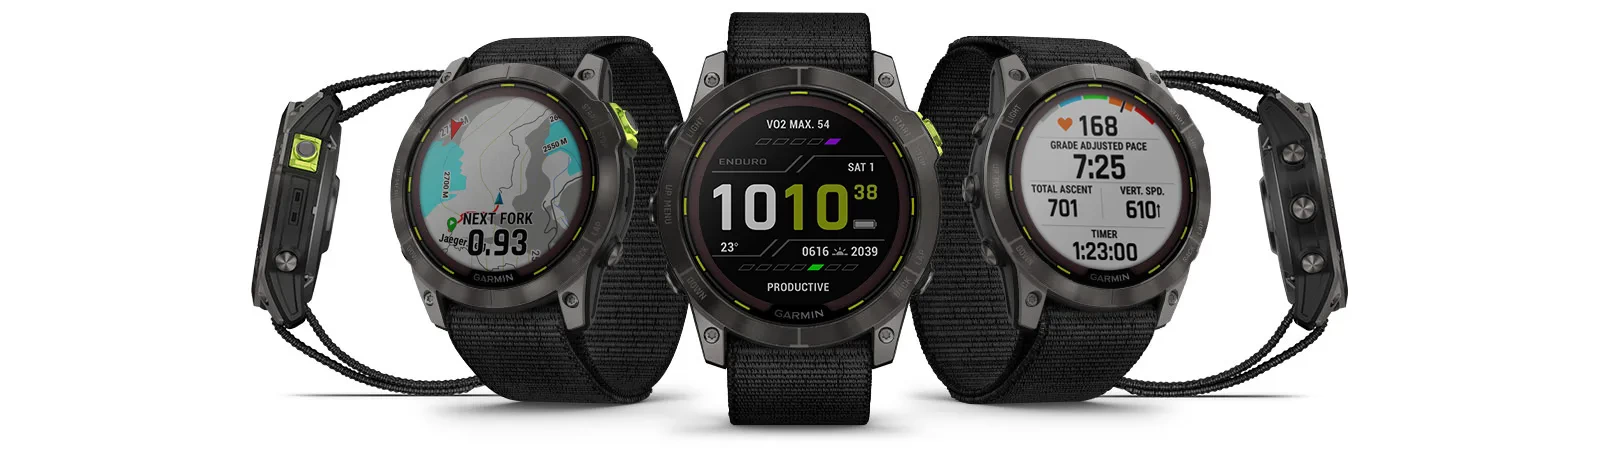 Discover the ideal Garmin watch for your running profile: Complete guide